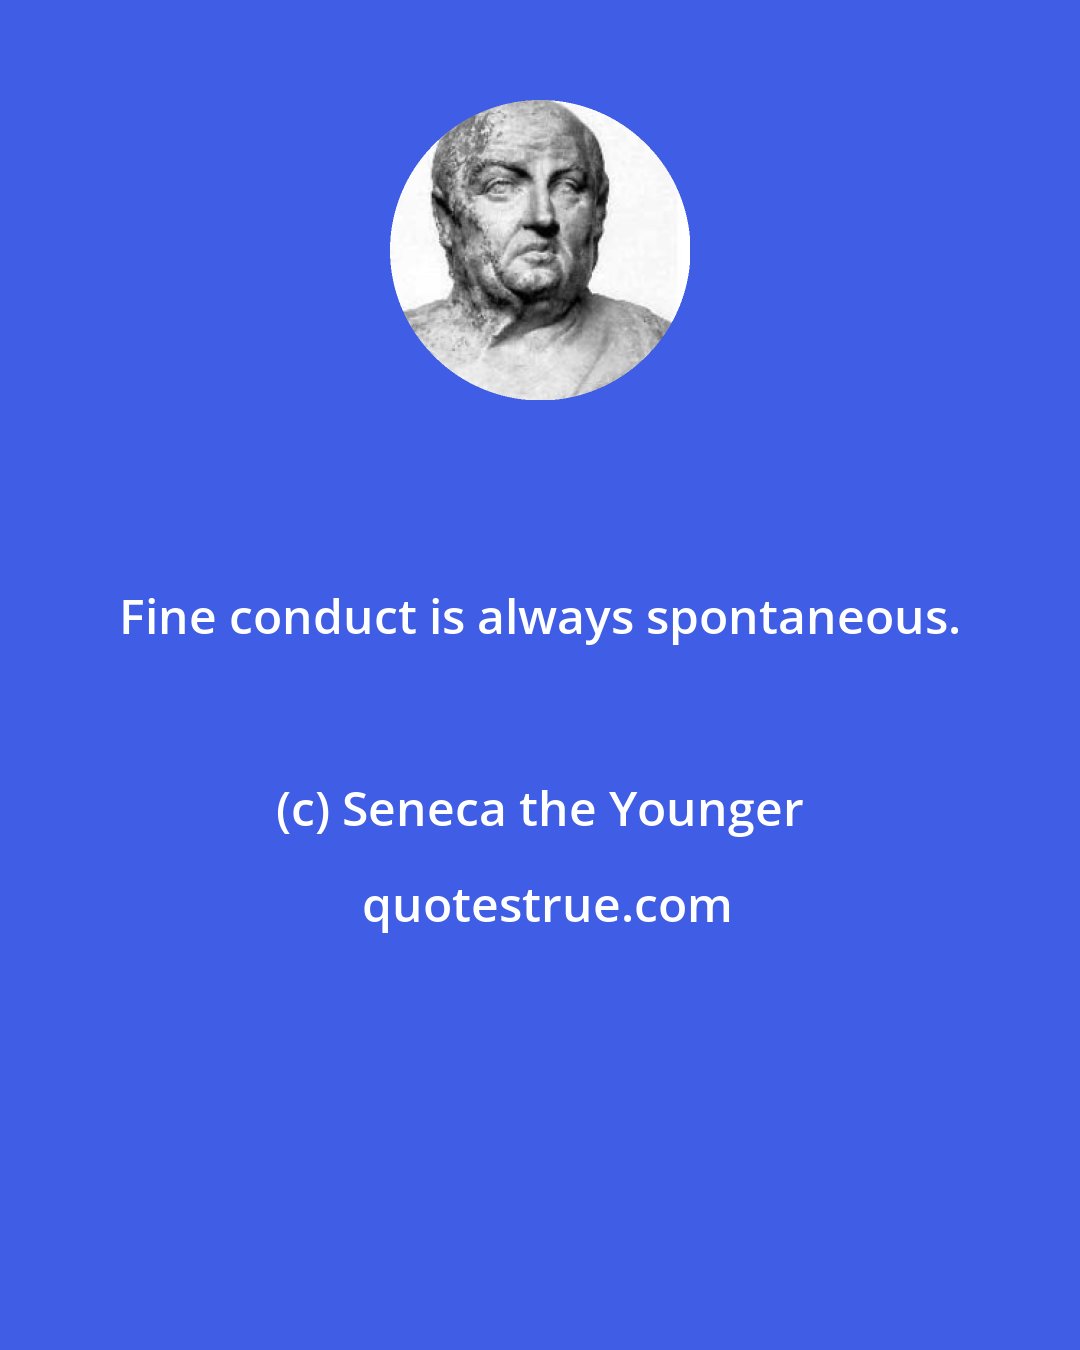 Seneca the Younger: Fine conduct is always spontaneous.